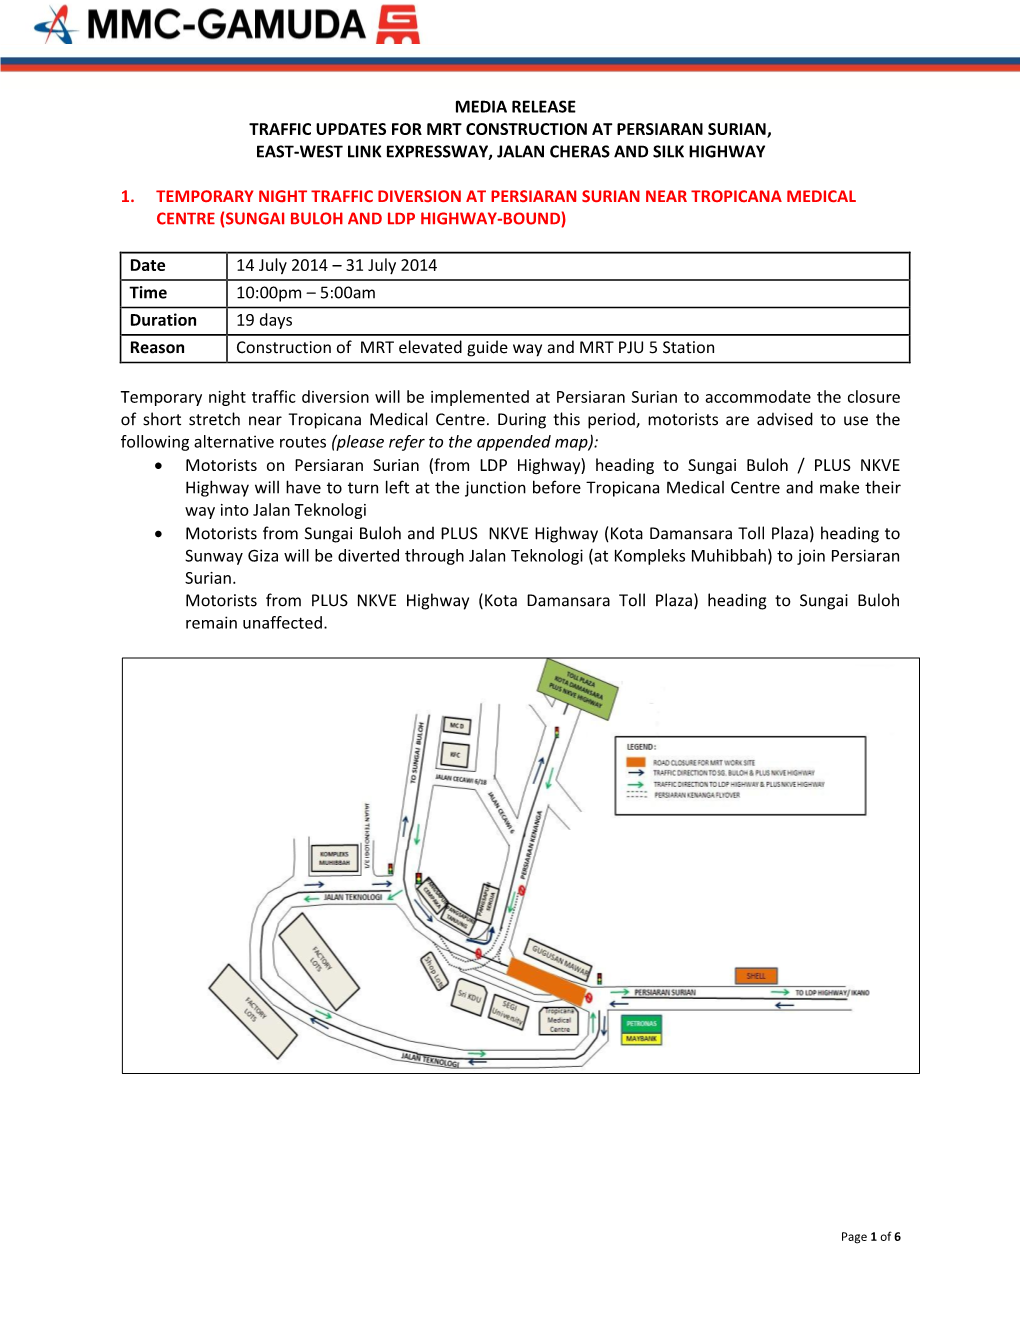 Media Release Traffic Updates for Mrt Construction at Persiaran Surian, East-West Link Expressway, Jalan Cheras and Silk Highway